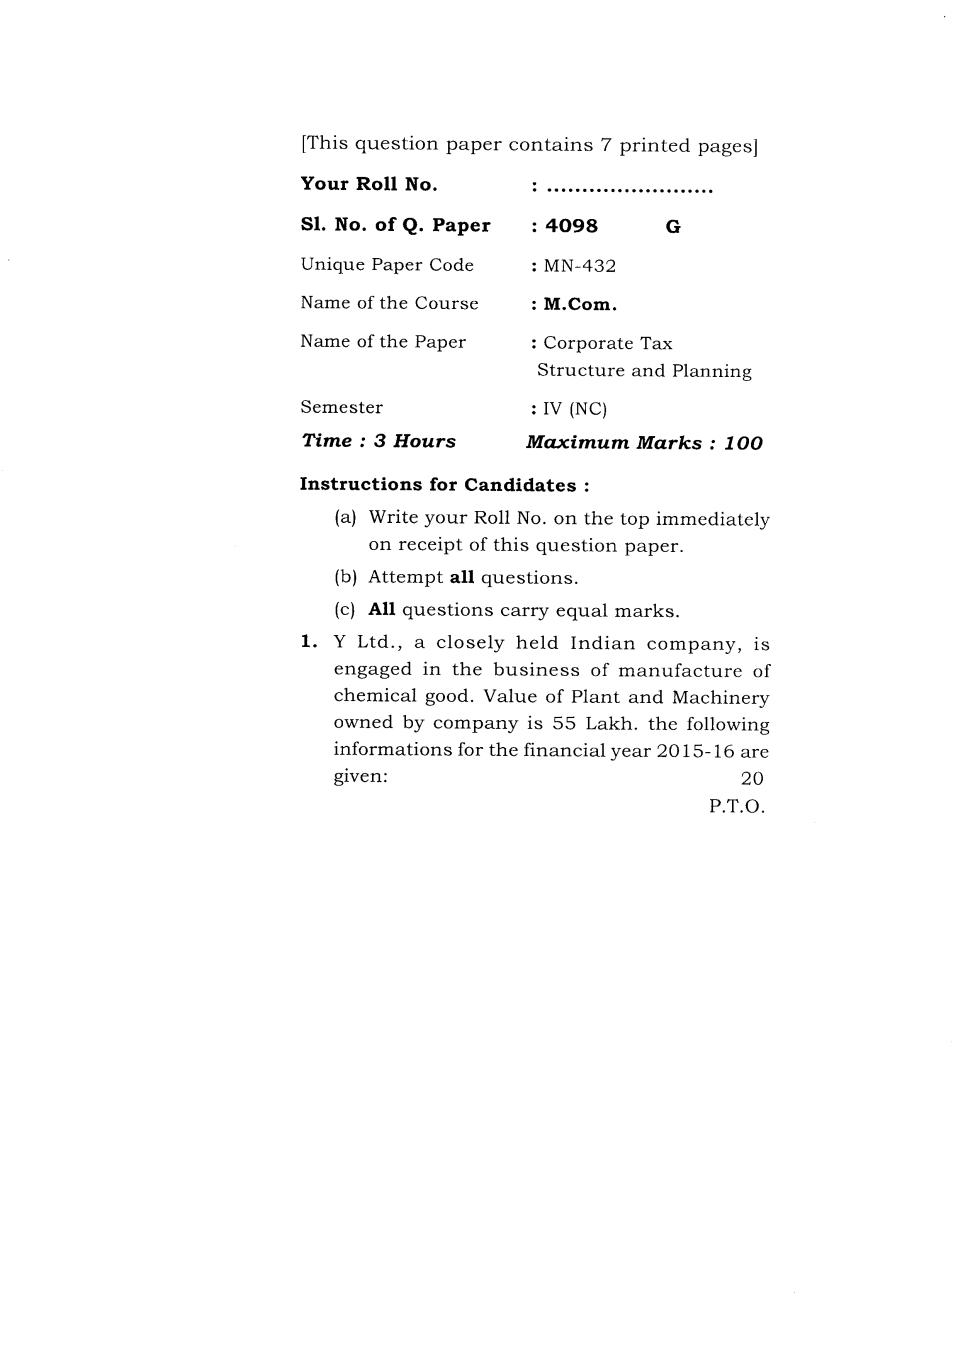 DU SOL M.Com Question Paper 2nd Year 2018 Sem 4 Corporate Tax Structure And Planning - Page 1